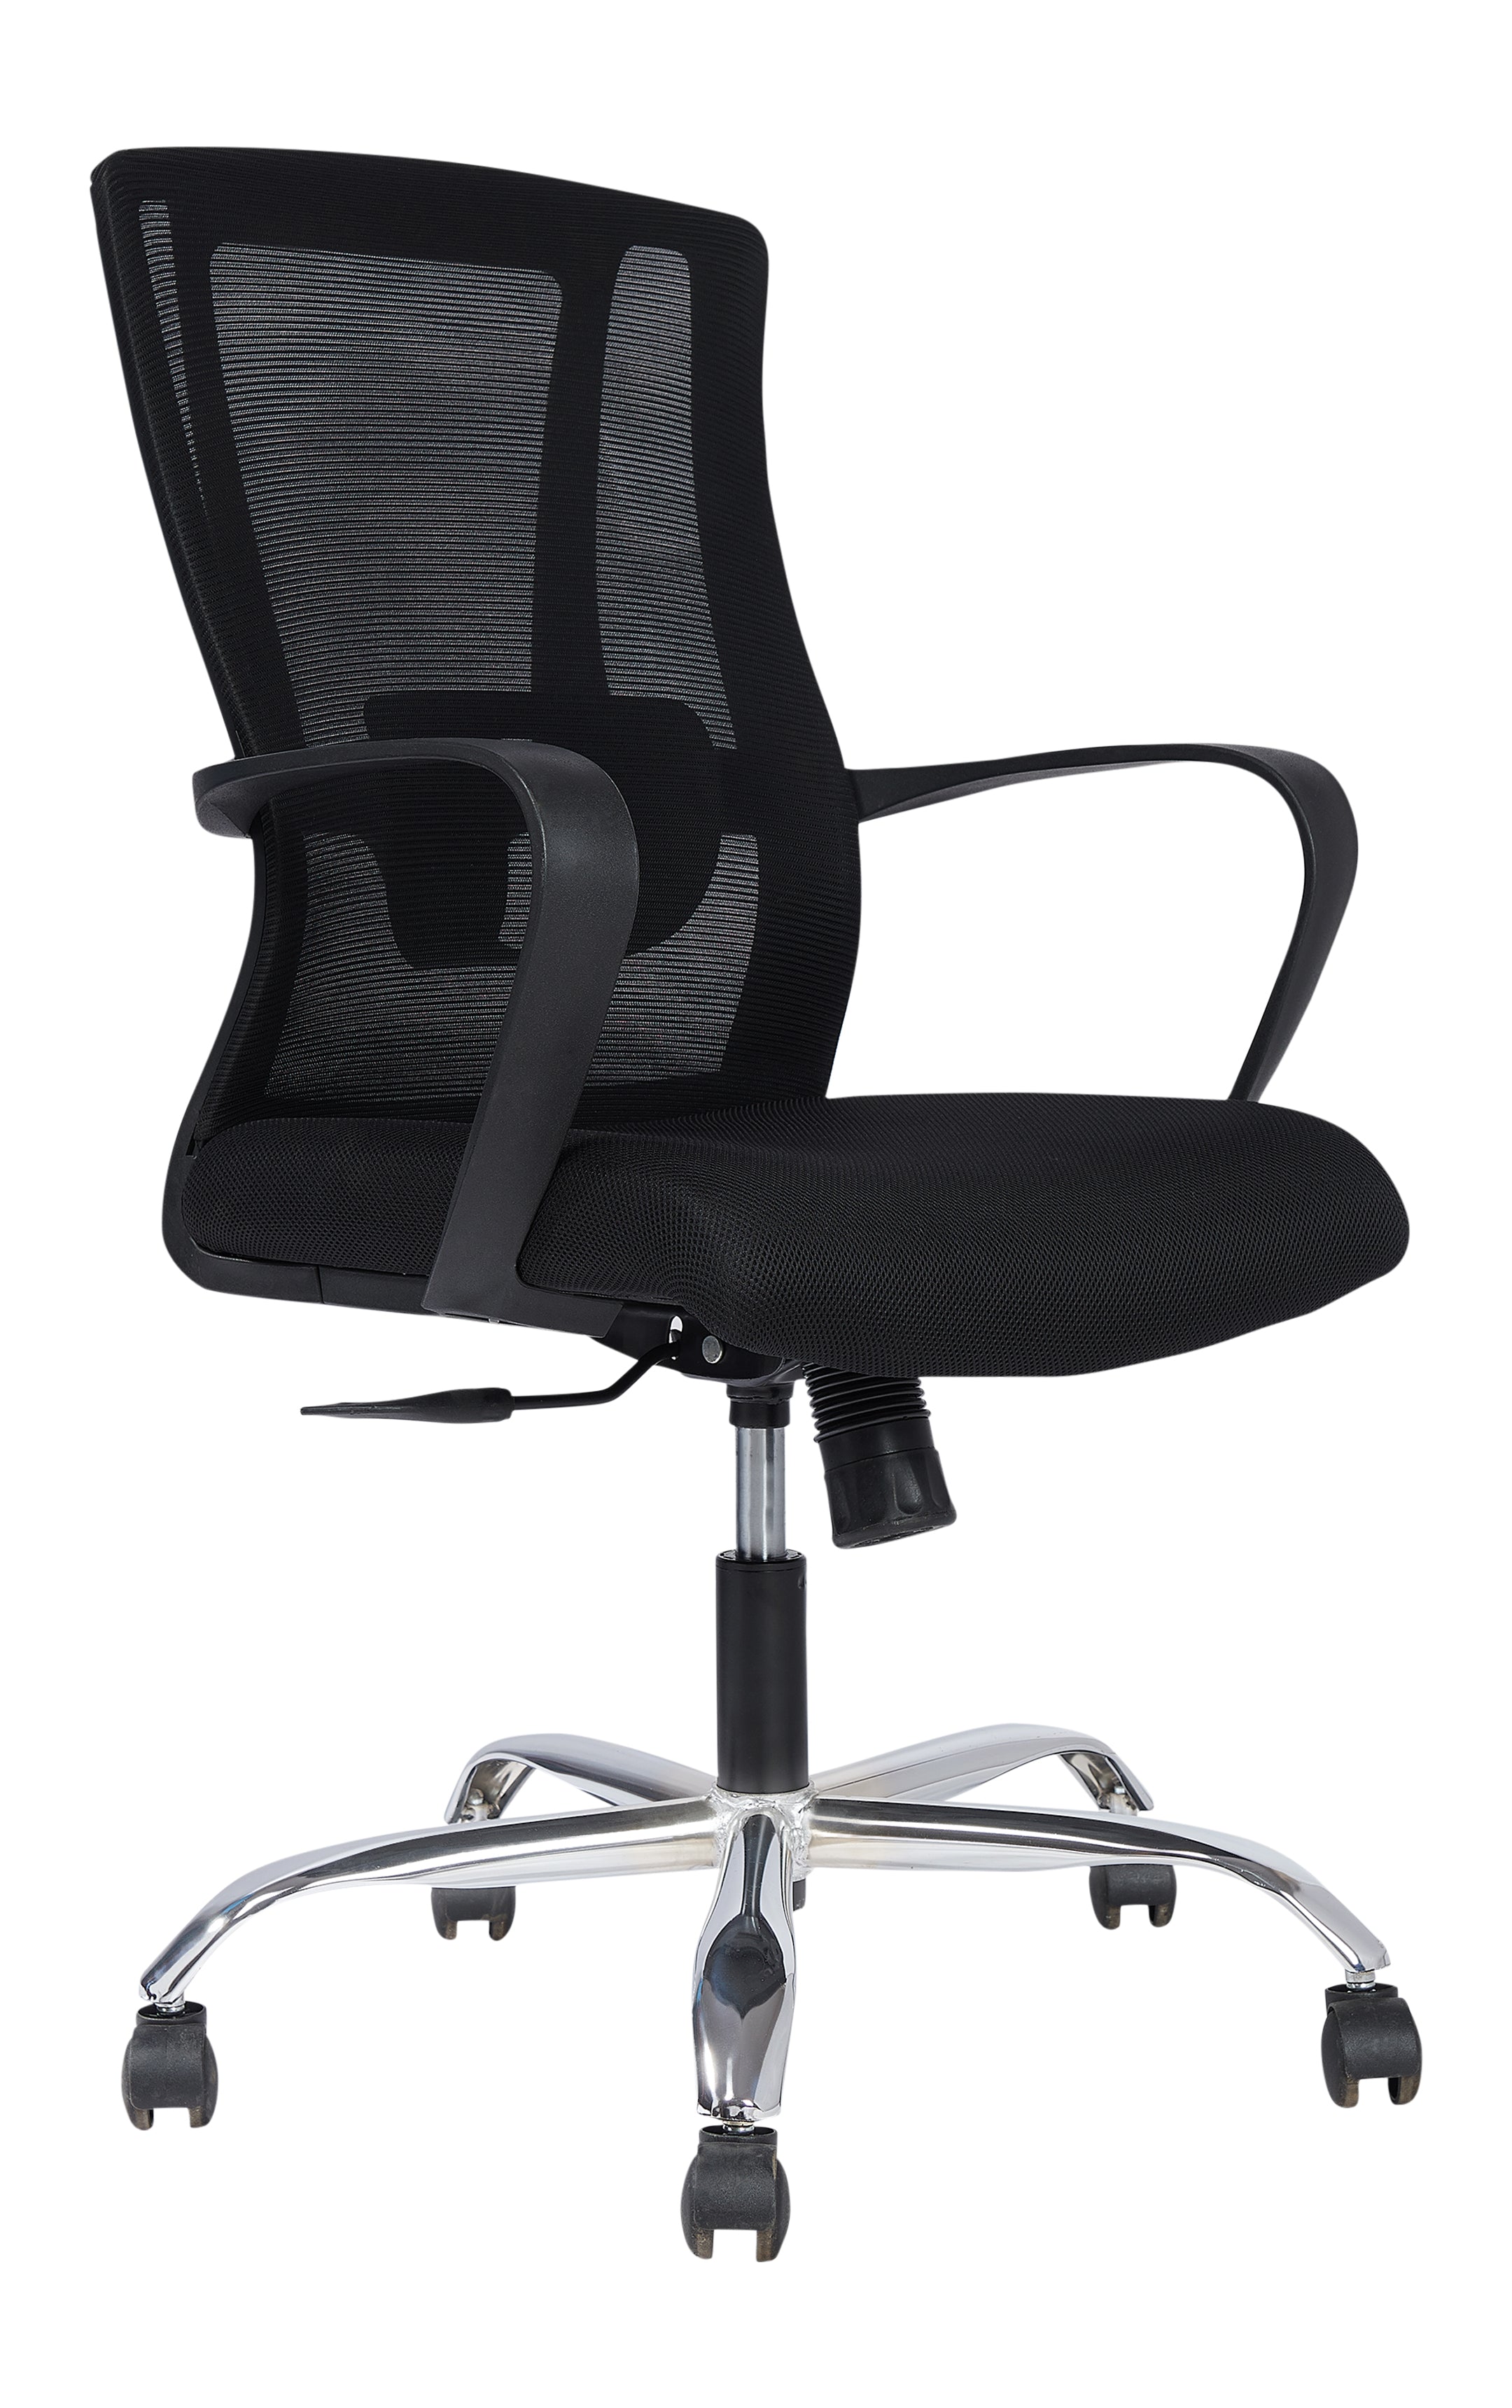 Eiger Mid Back Office Work Station Chair with Cushion Seat And Chrome Base - Black